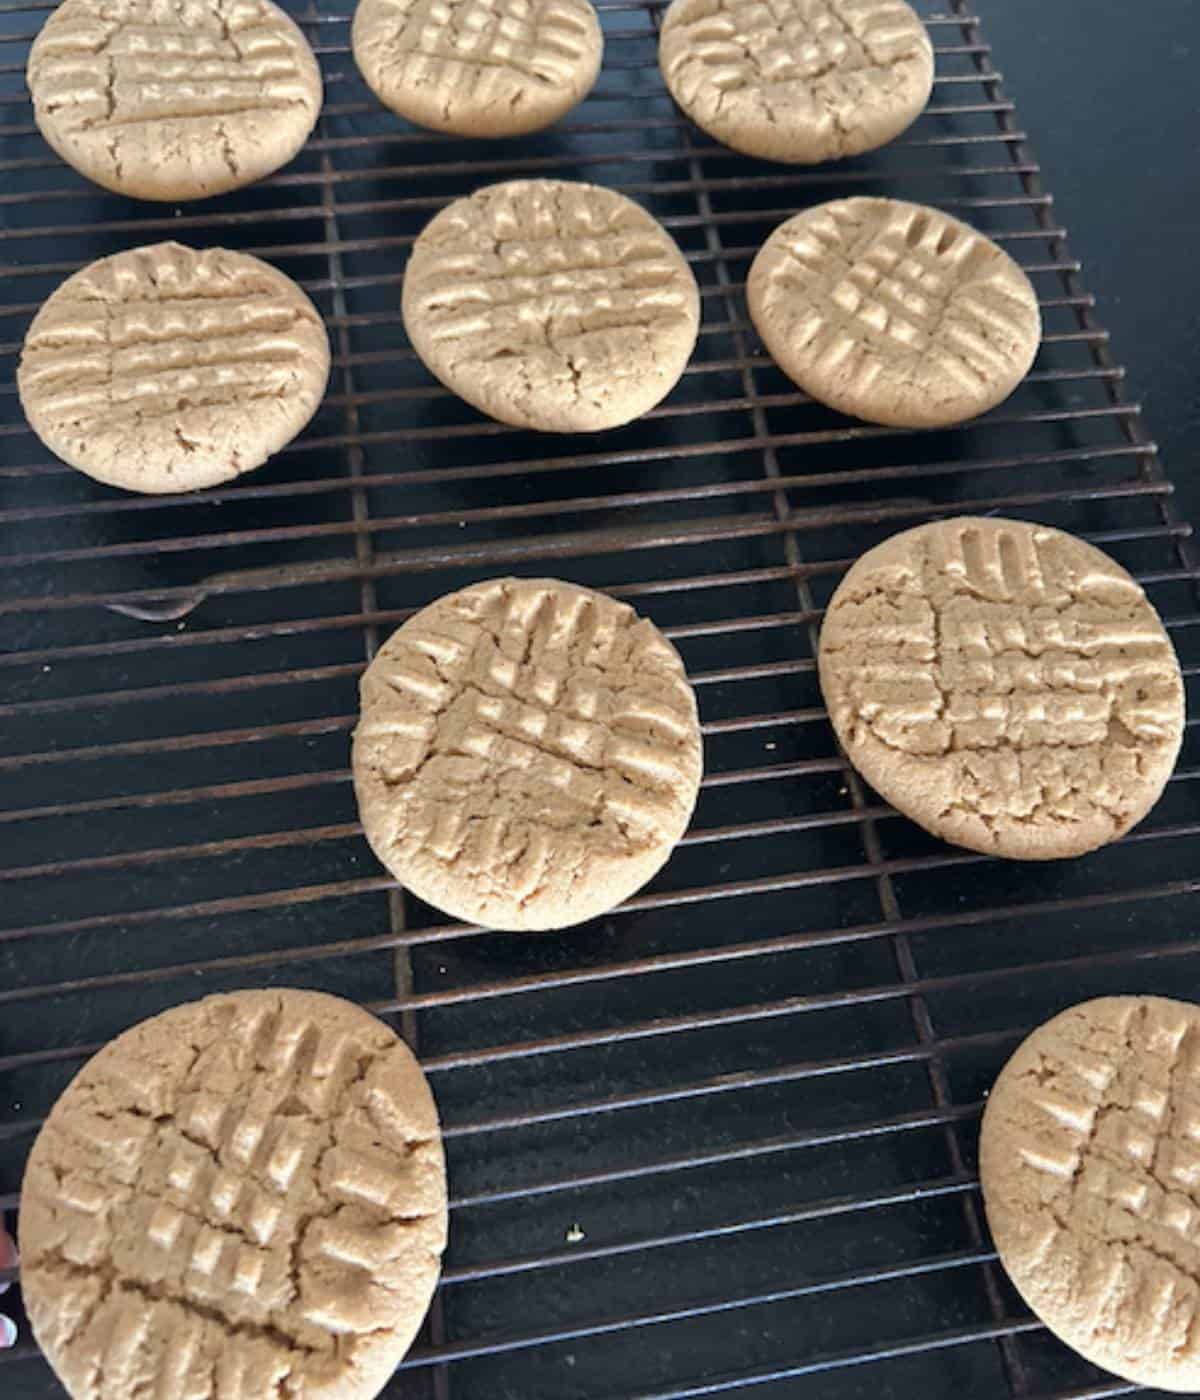 Cookies cooling on a wire rack.